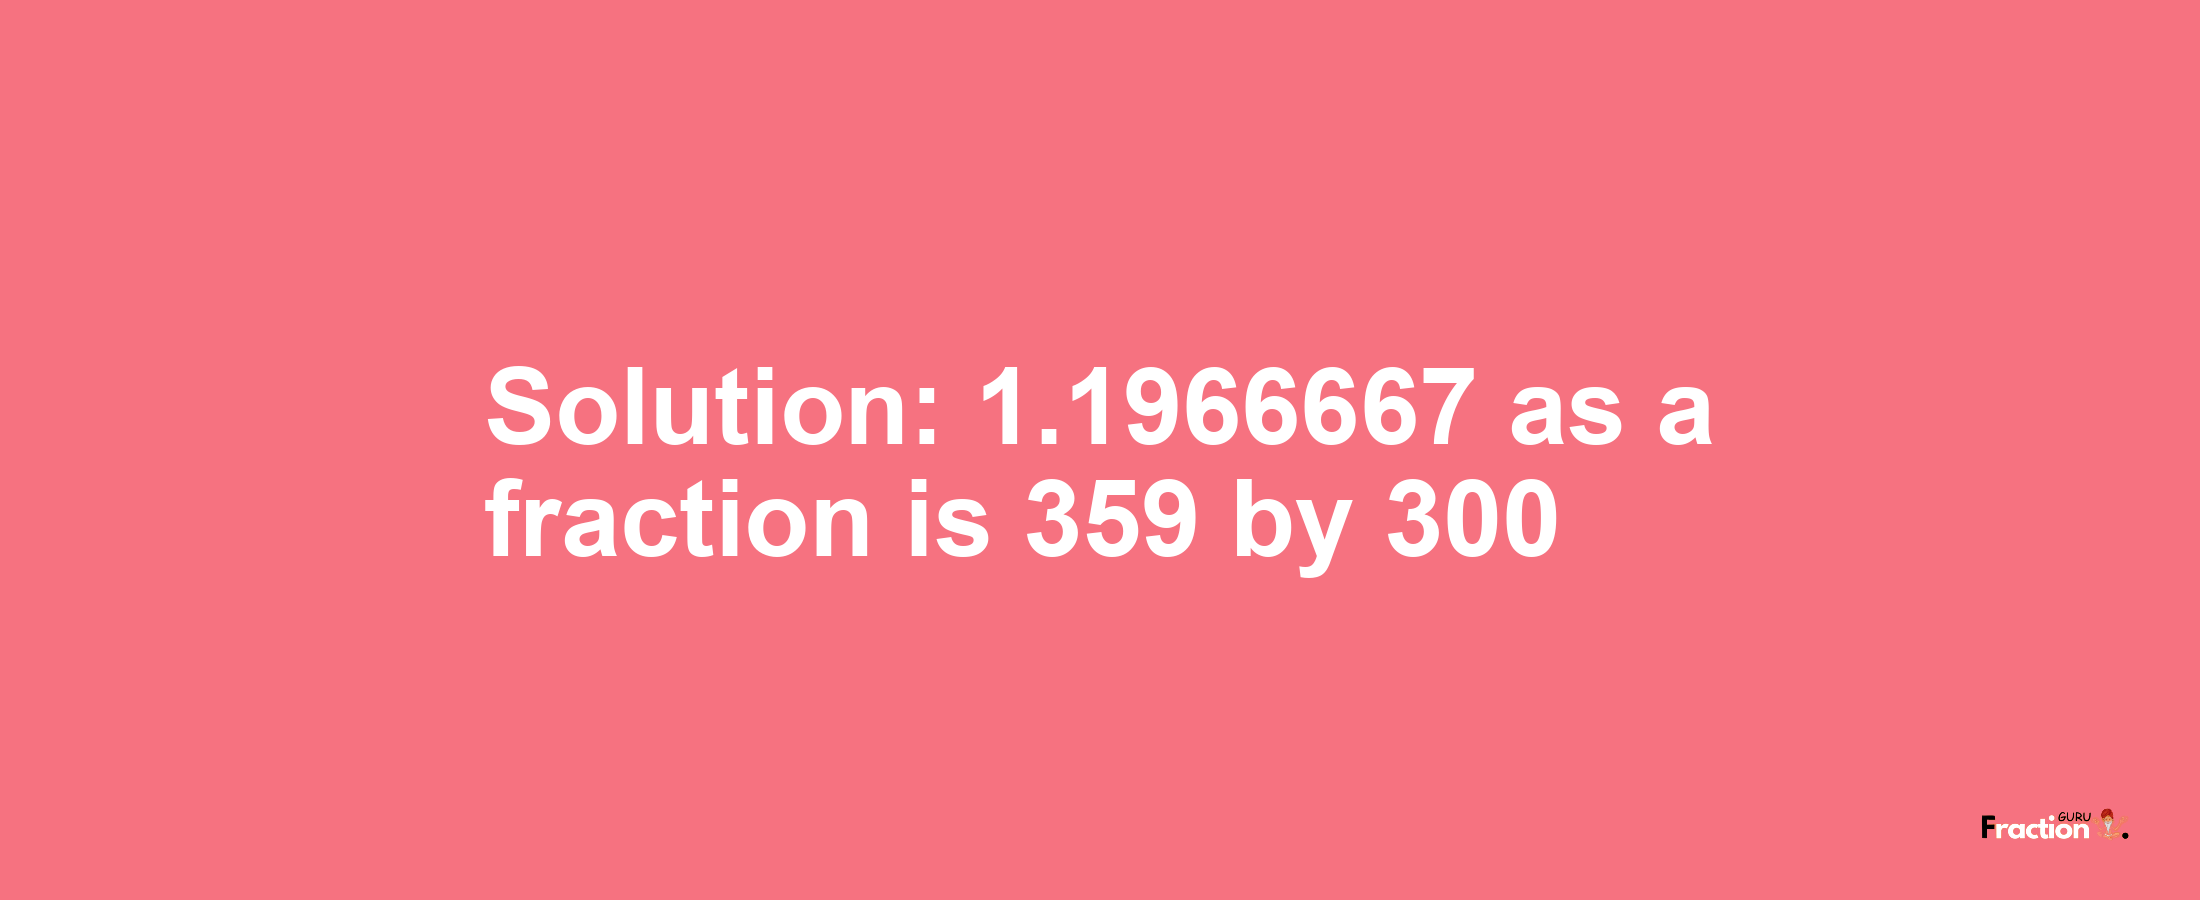 Solution:1.1966667 as a fraction is 359/300